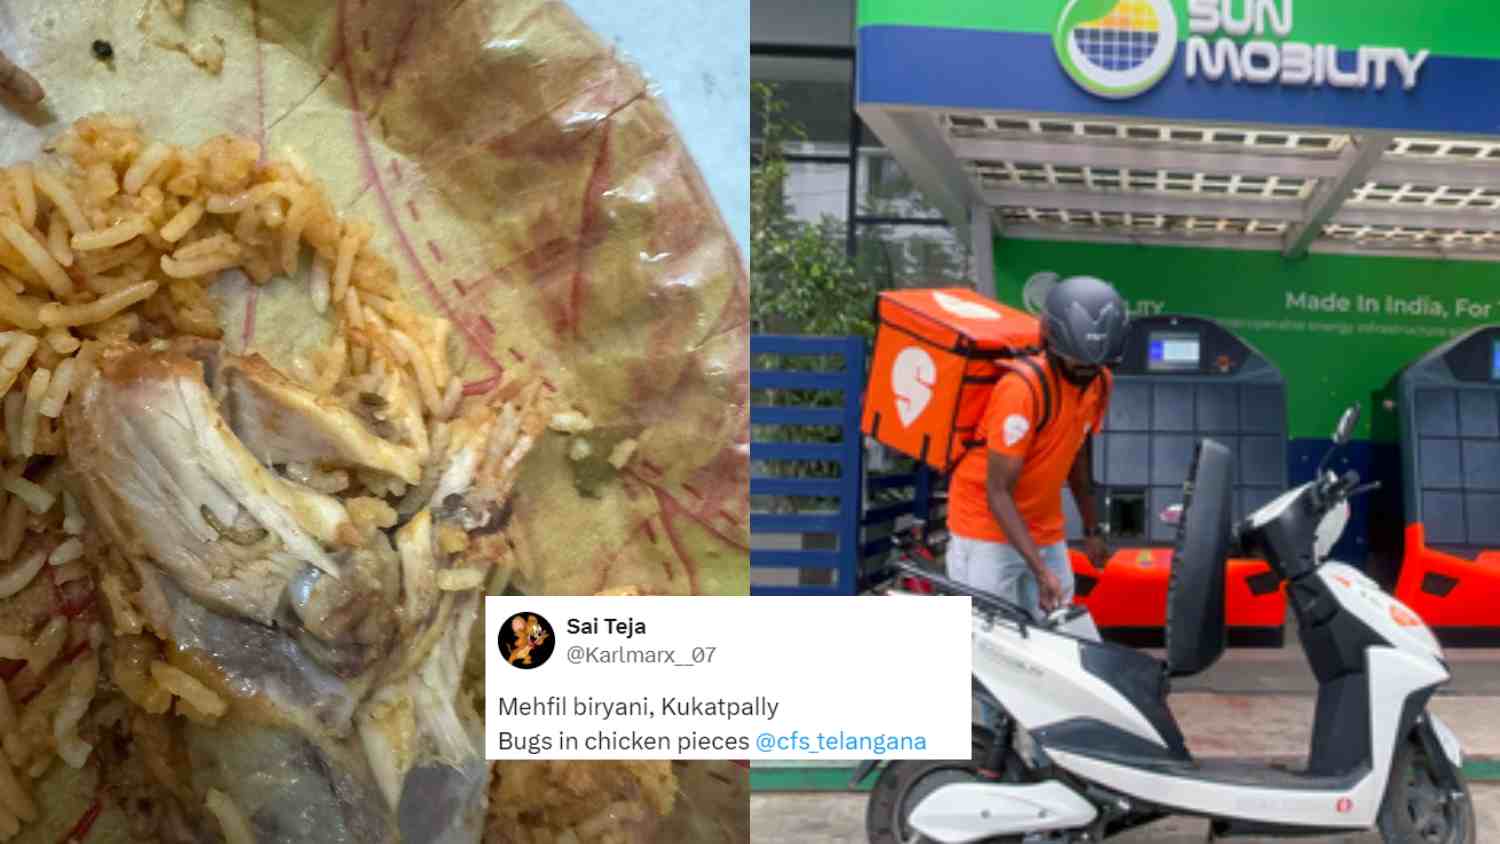 Man Finds Bugs In Chicken Biryani Ordered From Swiggy; From Bone In Veg Biryani To Insects, Netizens Share Similar Instances